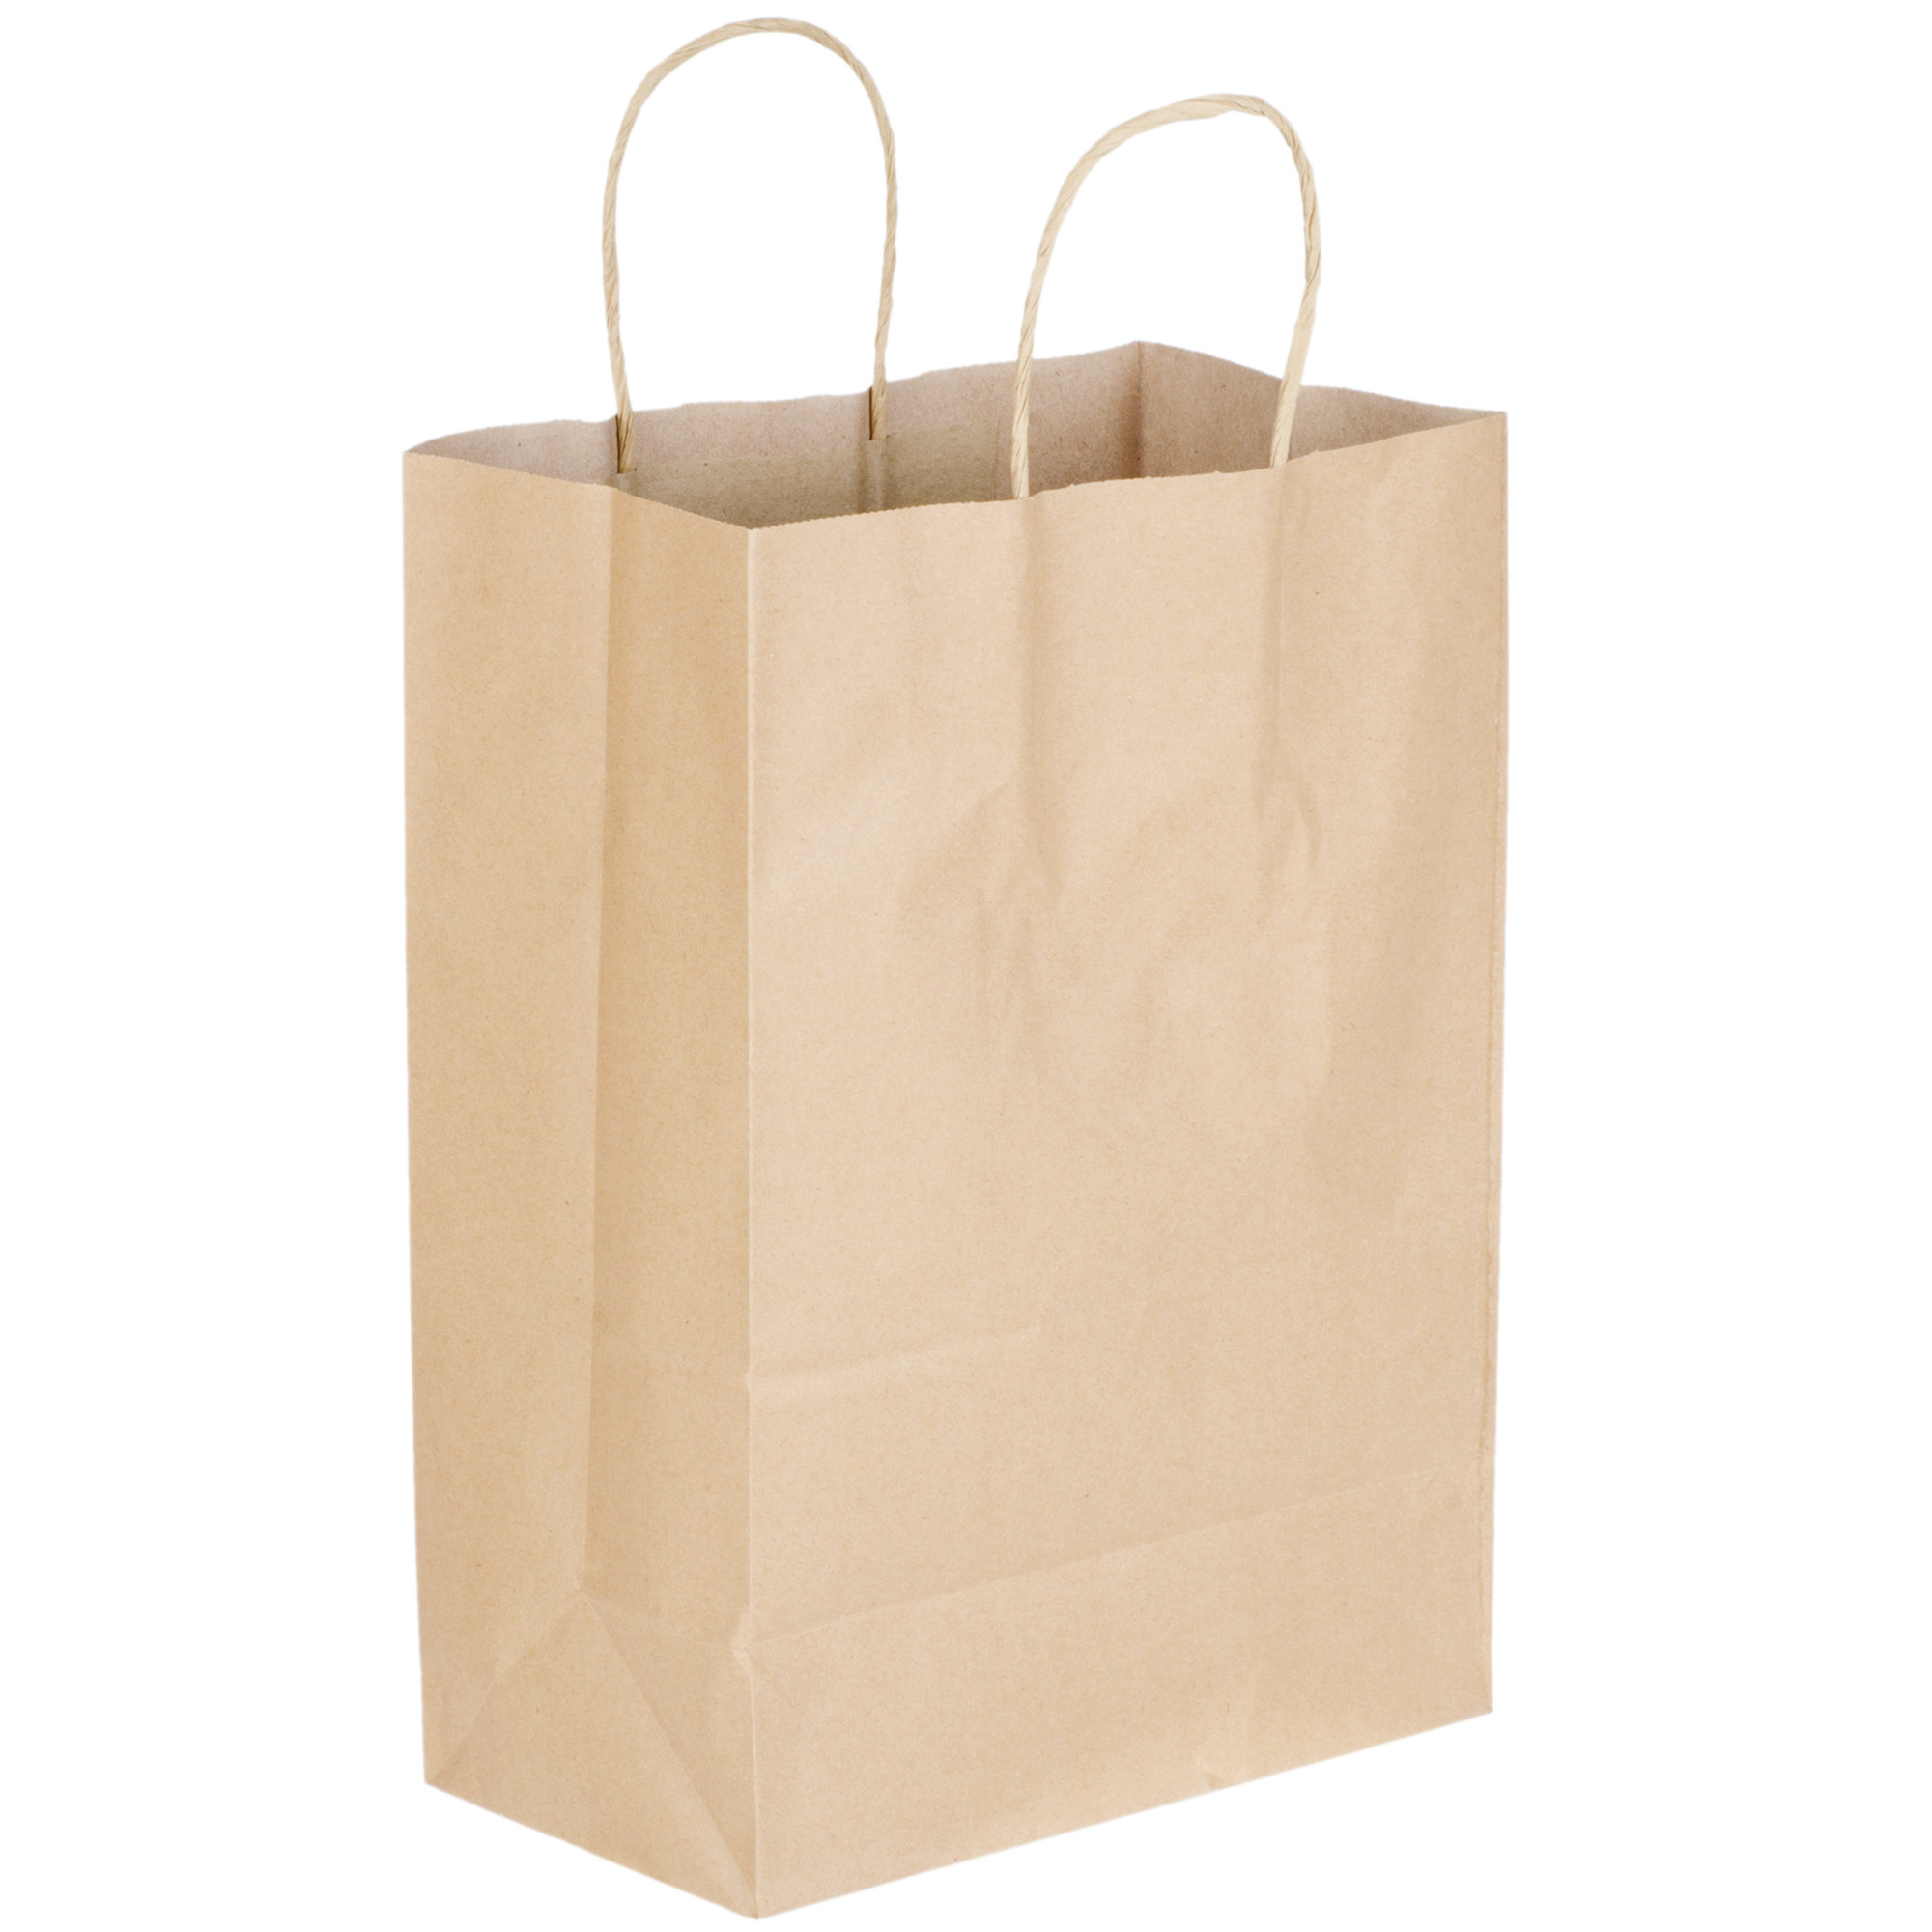 NATURAL KRAFT SHOPPING BAG WITH TWISTED HANDLES, SMALL, 